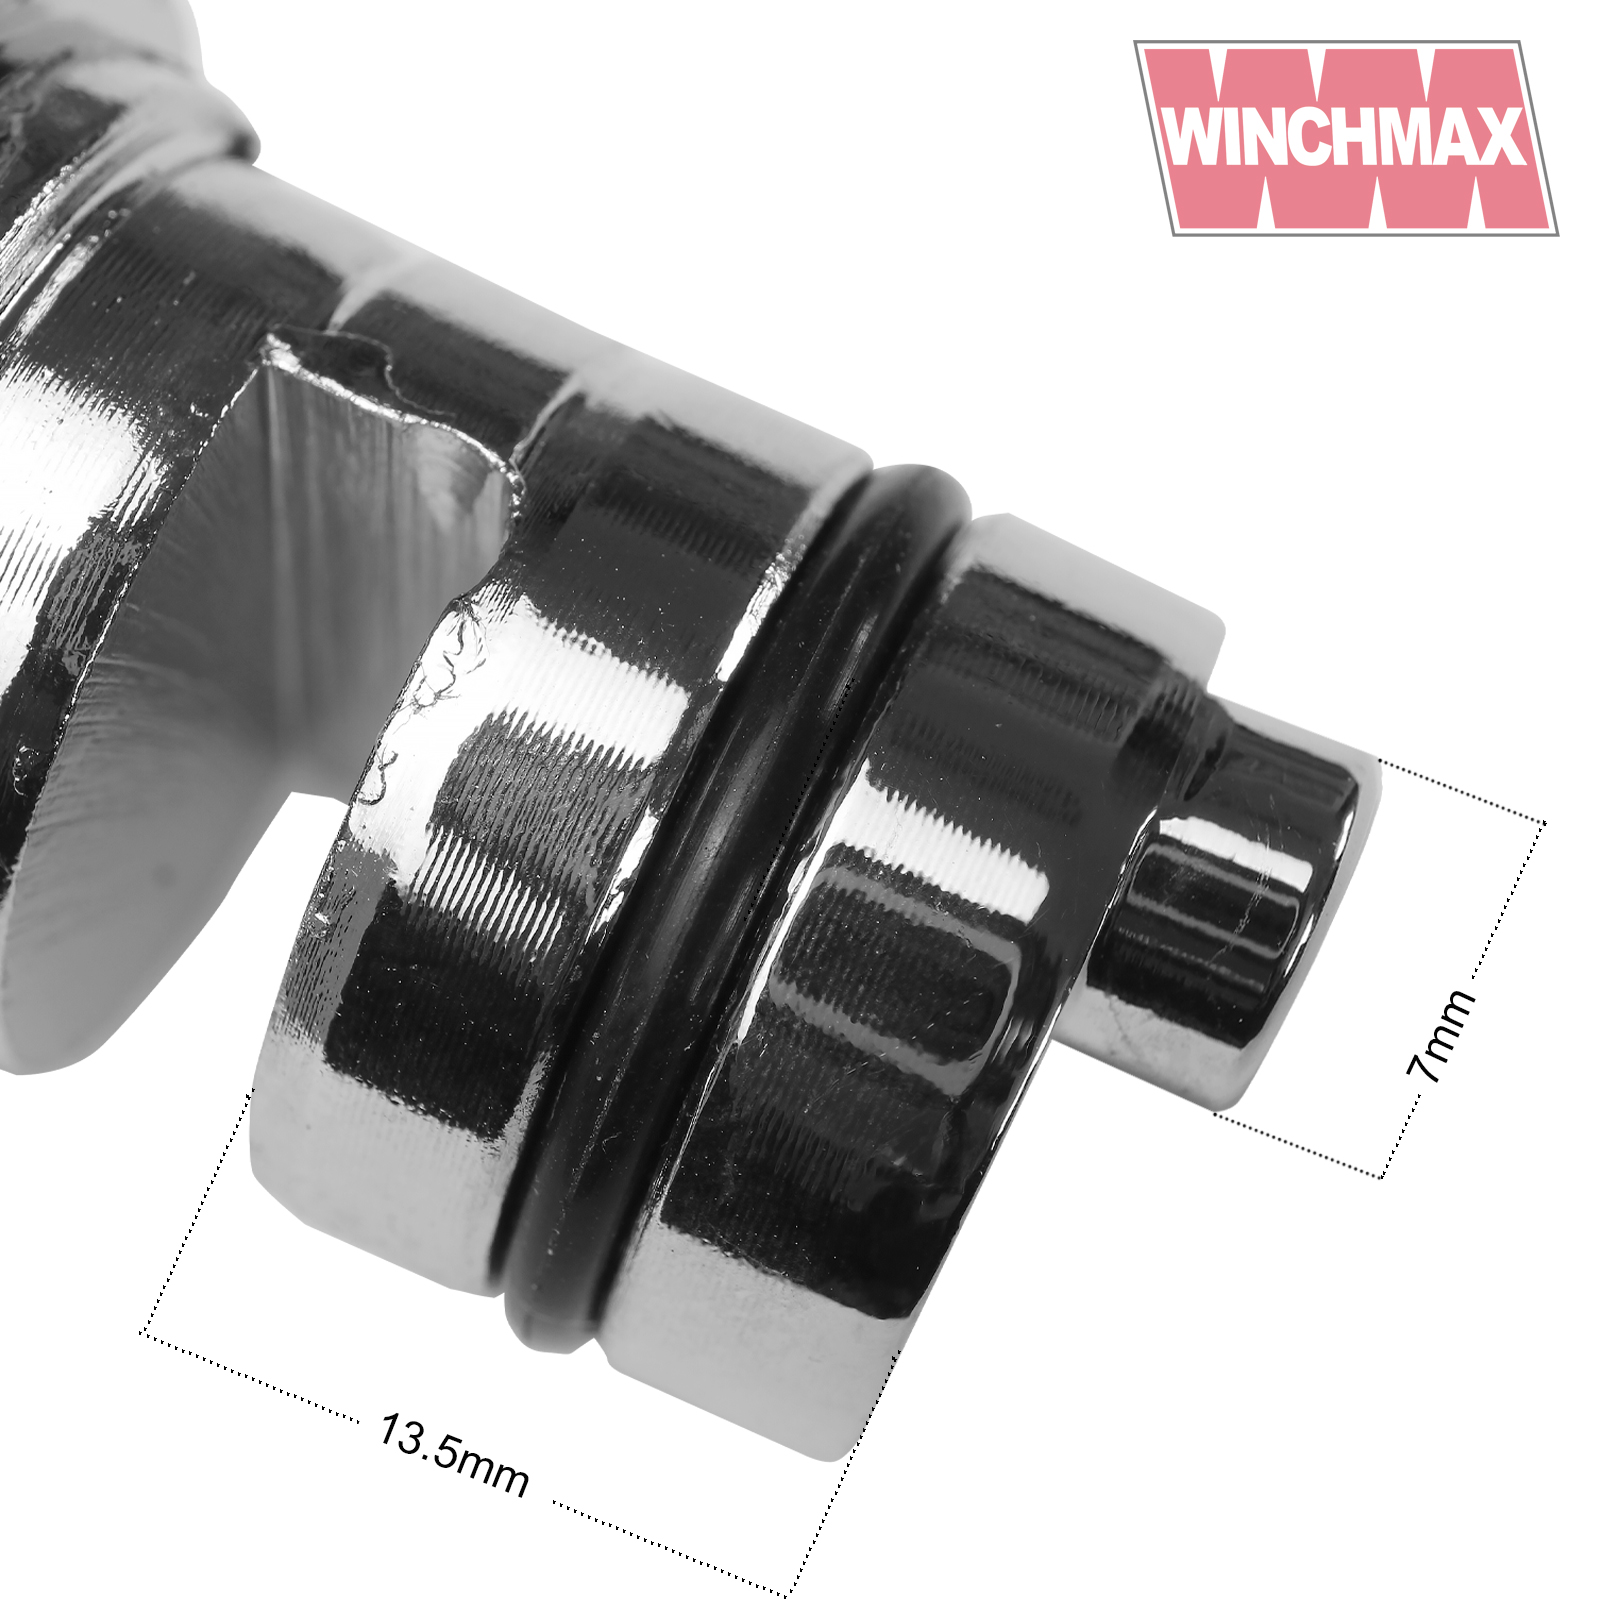 Replacement clutch handle for 17500lb winch